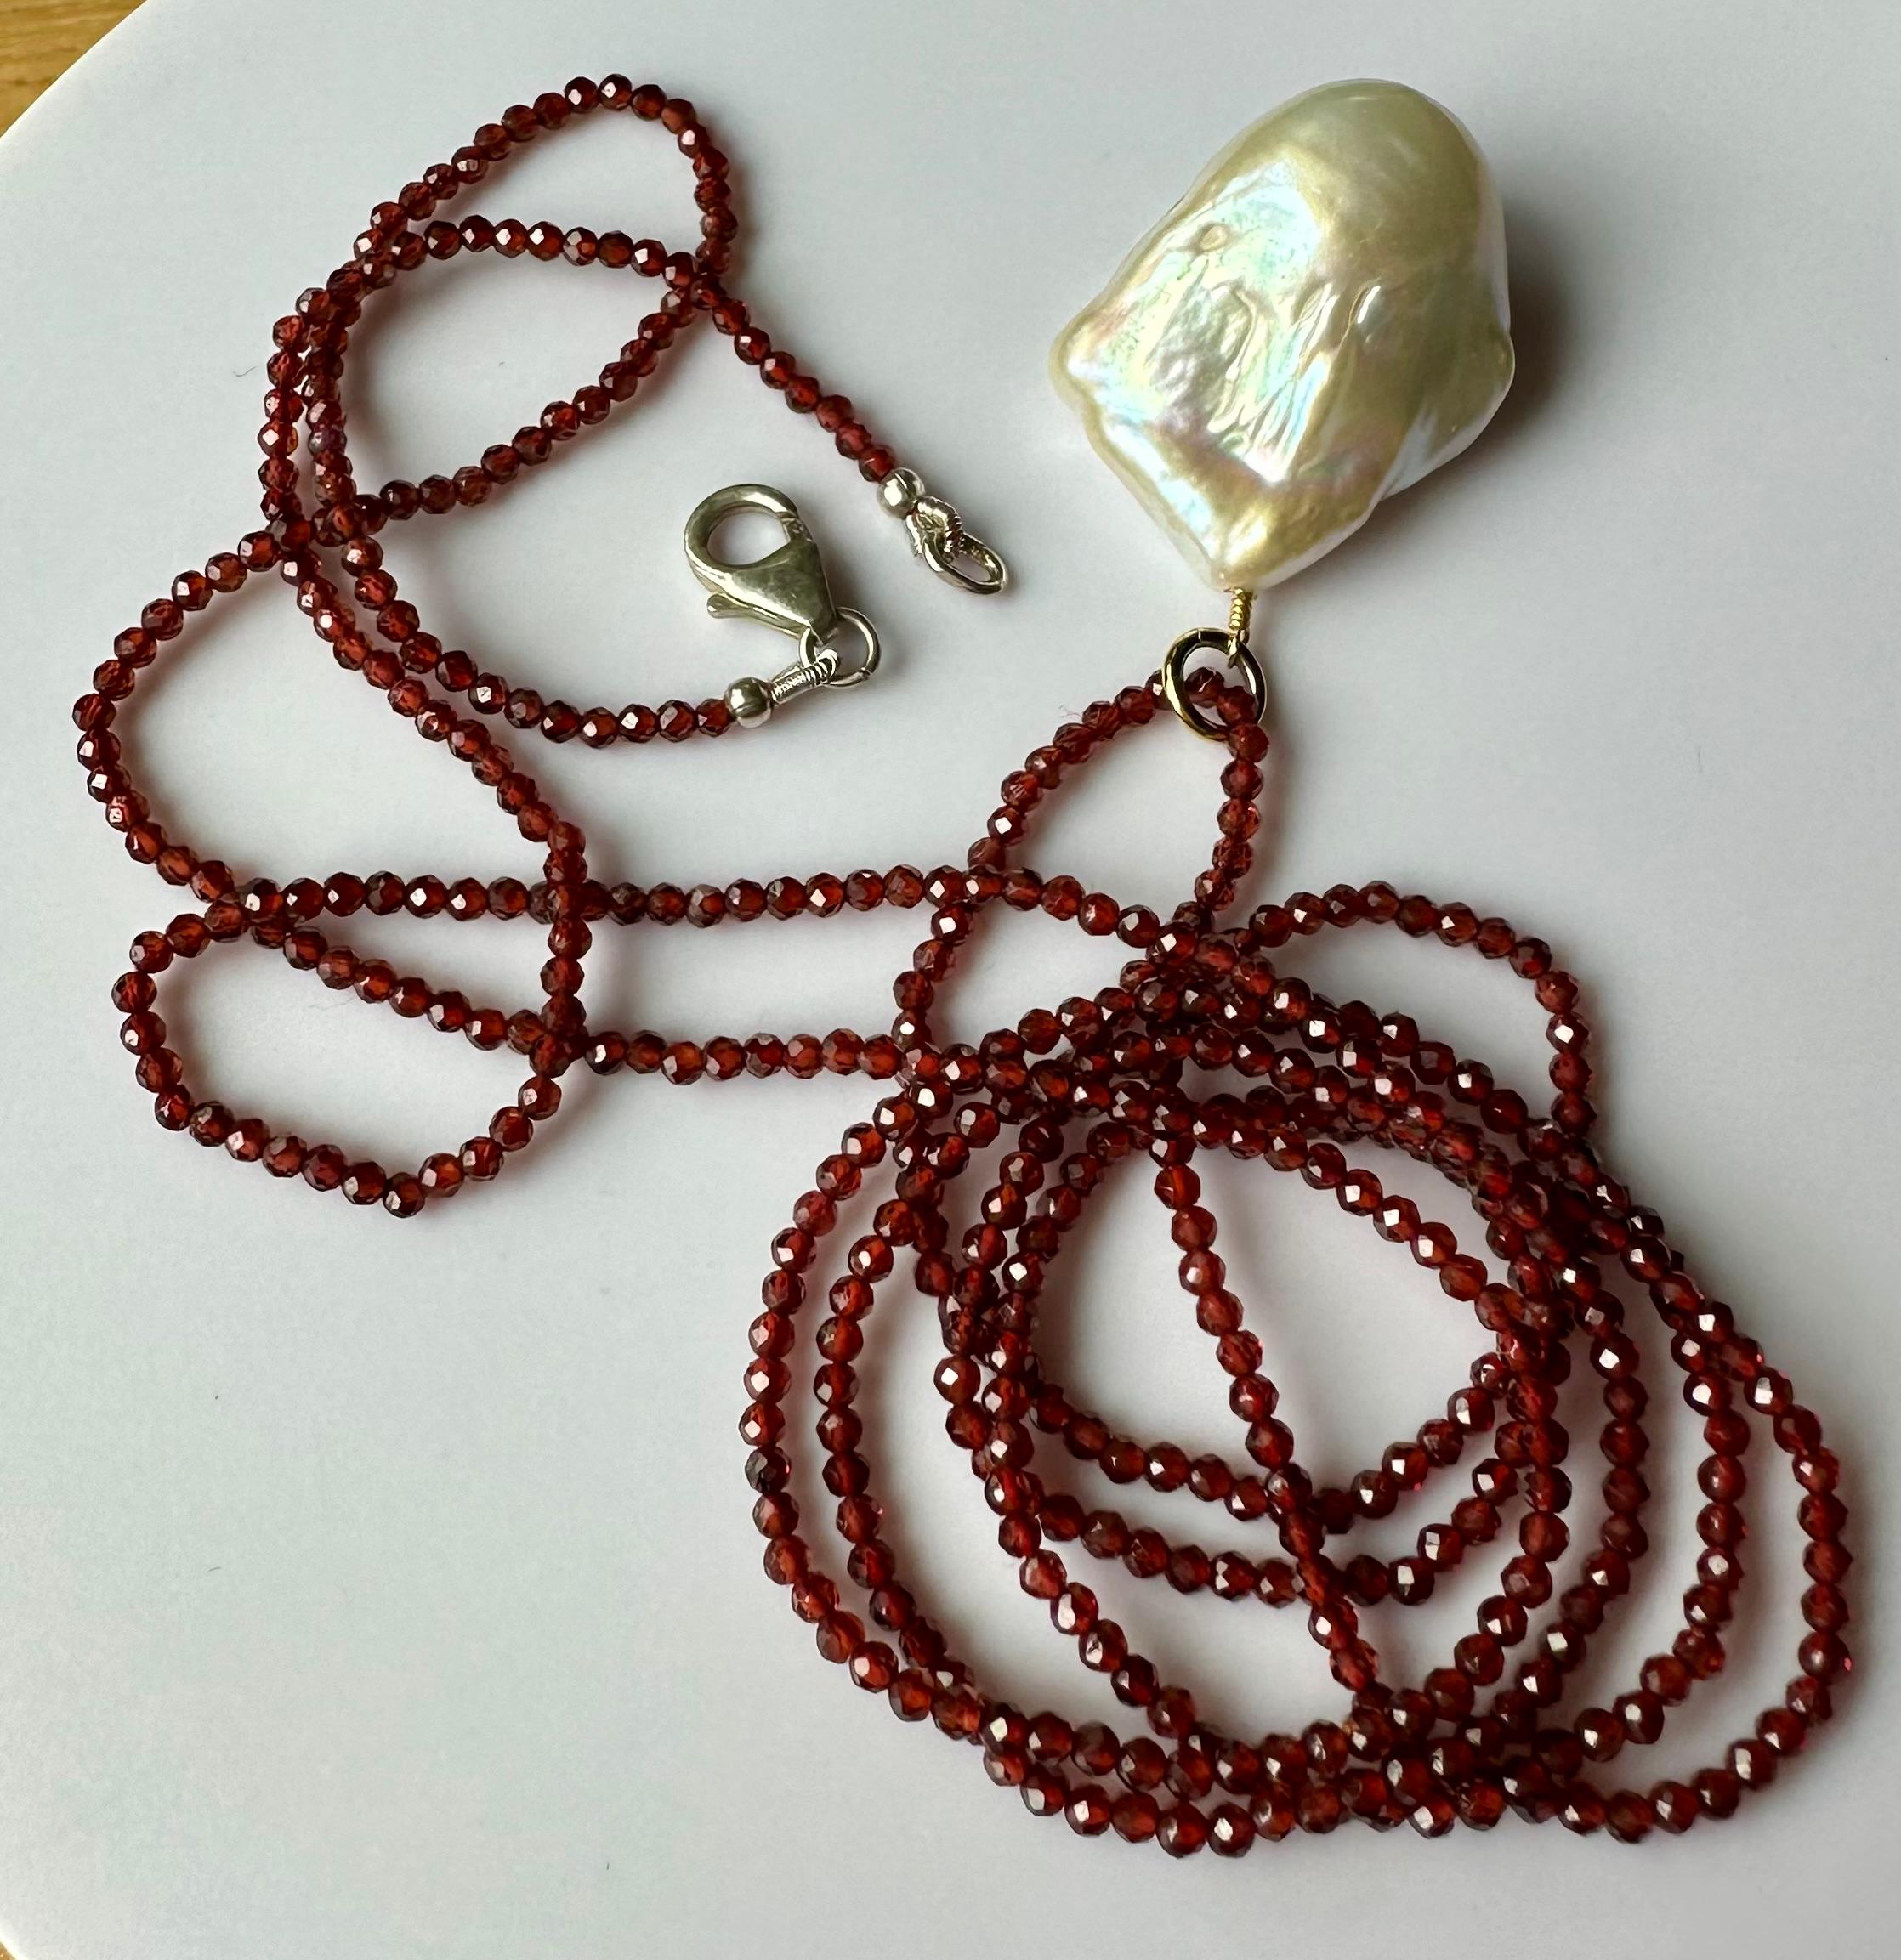 A Baroque South Sea Pearl Pendant hanging from a 24 Inch Beaded Garnet Necklace In New Condition For Sale In Coupeville, WA